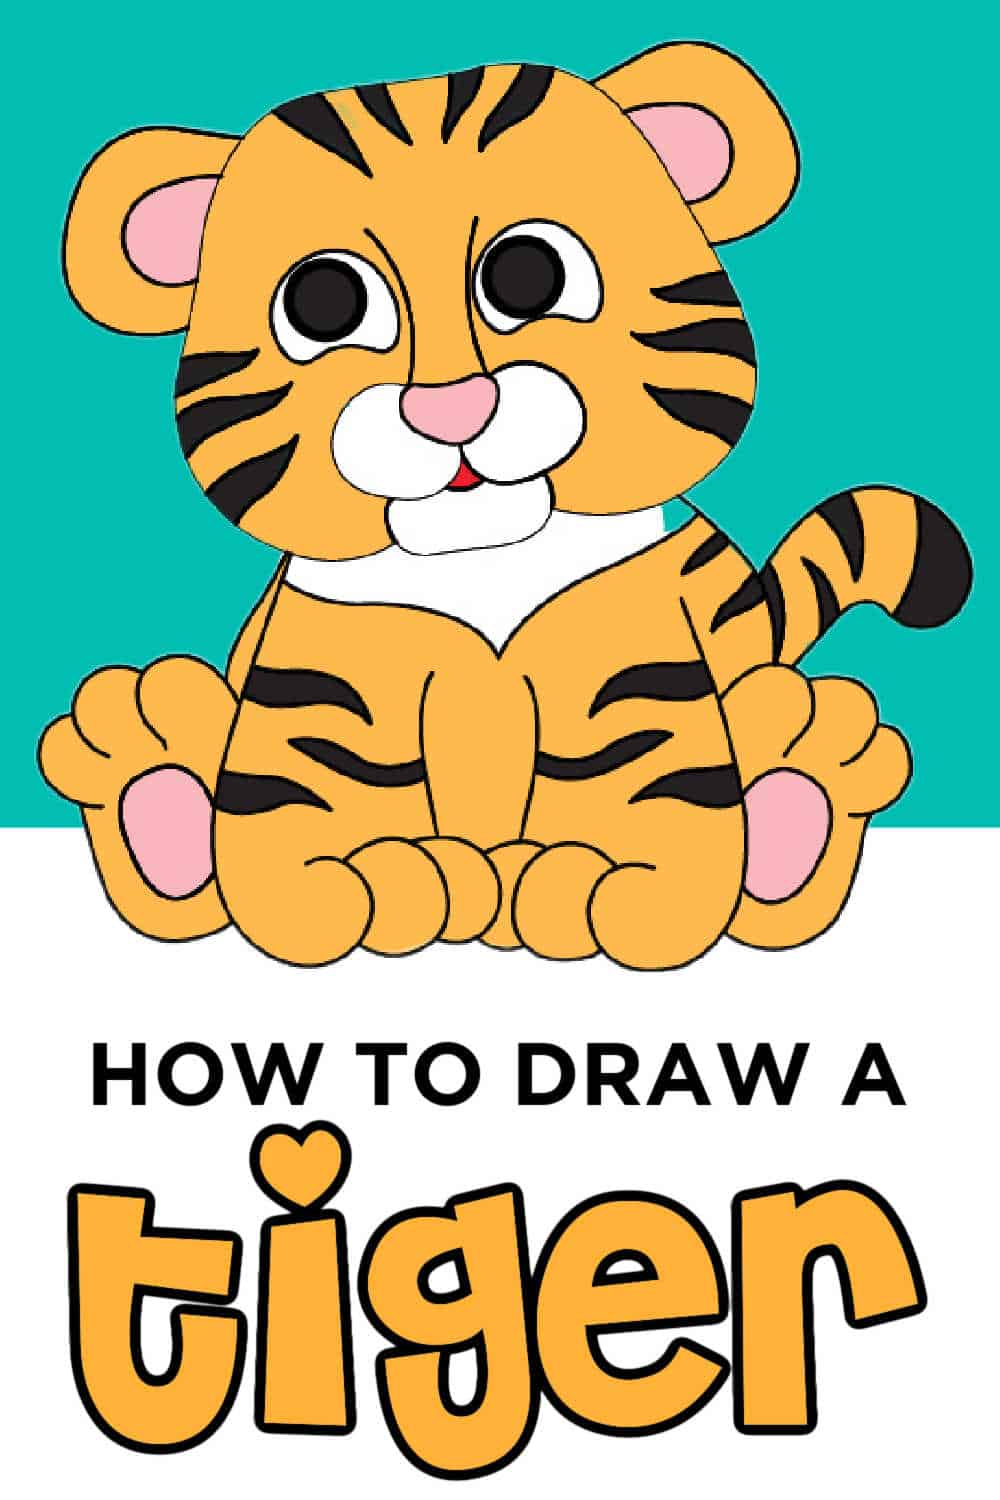 Easy Animals to Draw For Practice - Cute Animal Drawings for Kids - YouTube